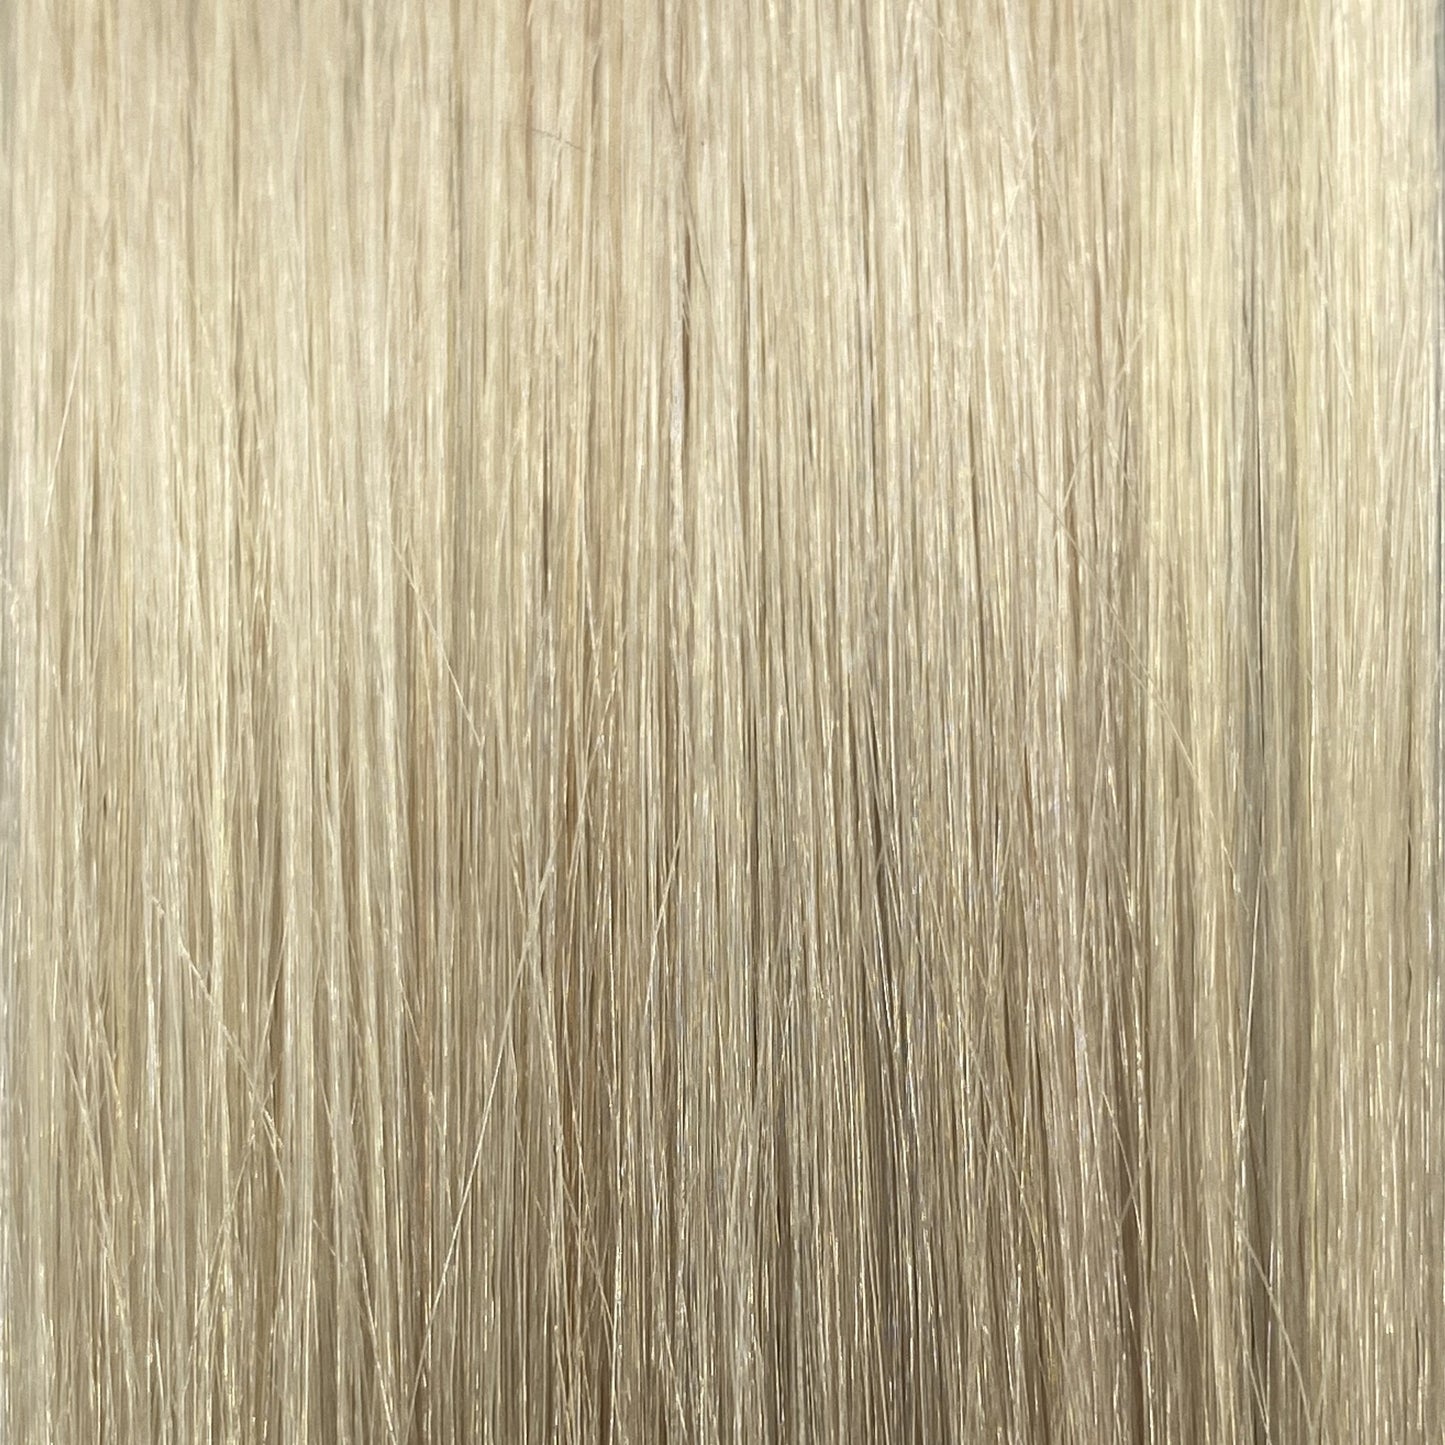 Fusion hair extensions #1004 - 50cm/20 inches - Ultra Very Light Platinum Blonde Fusion Euro So Cap 